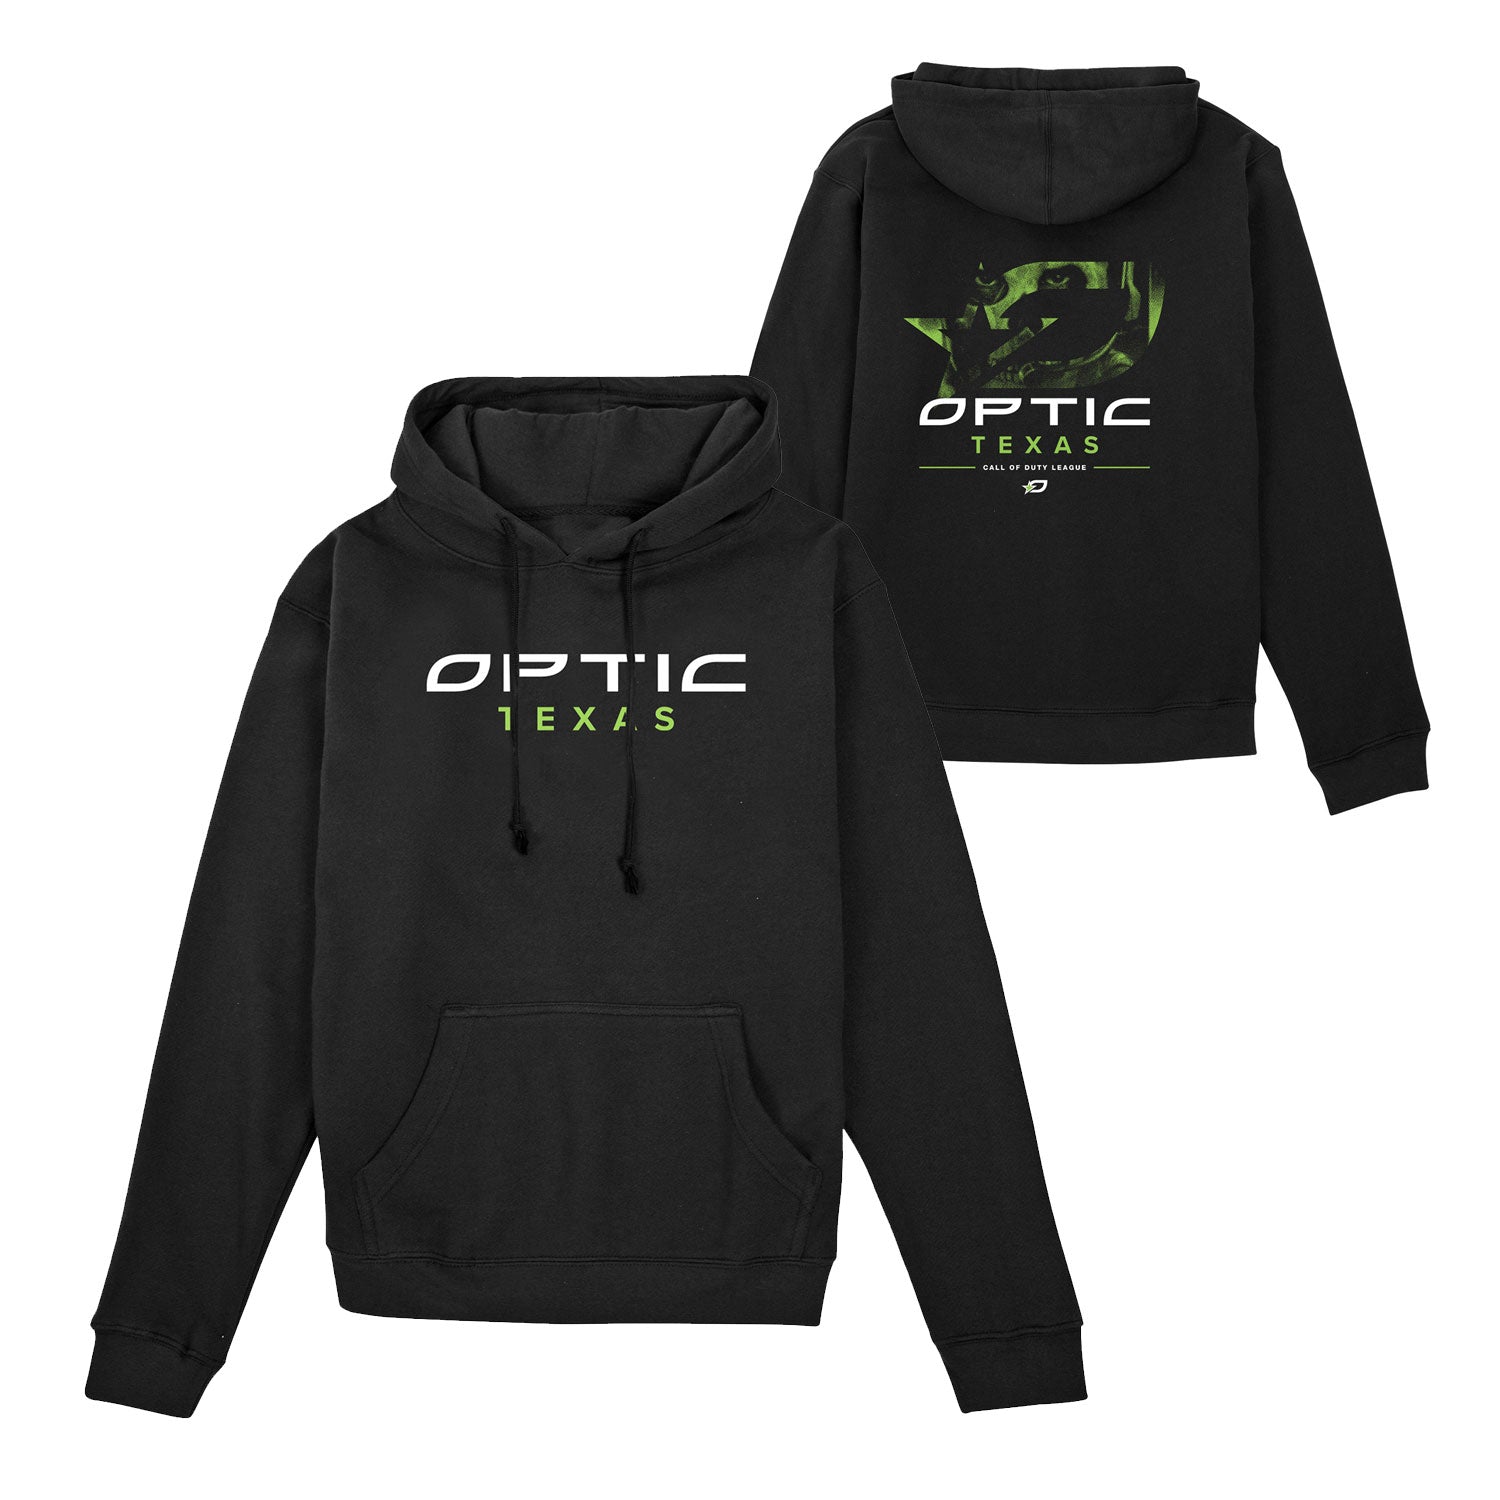 OpTic Texas Ghost Logo Black Hoodie - front and back views